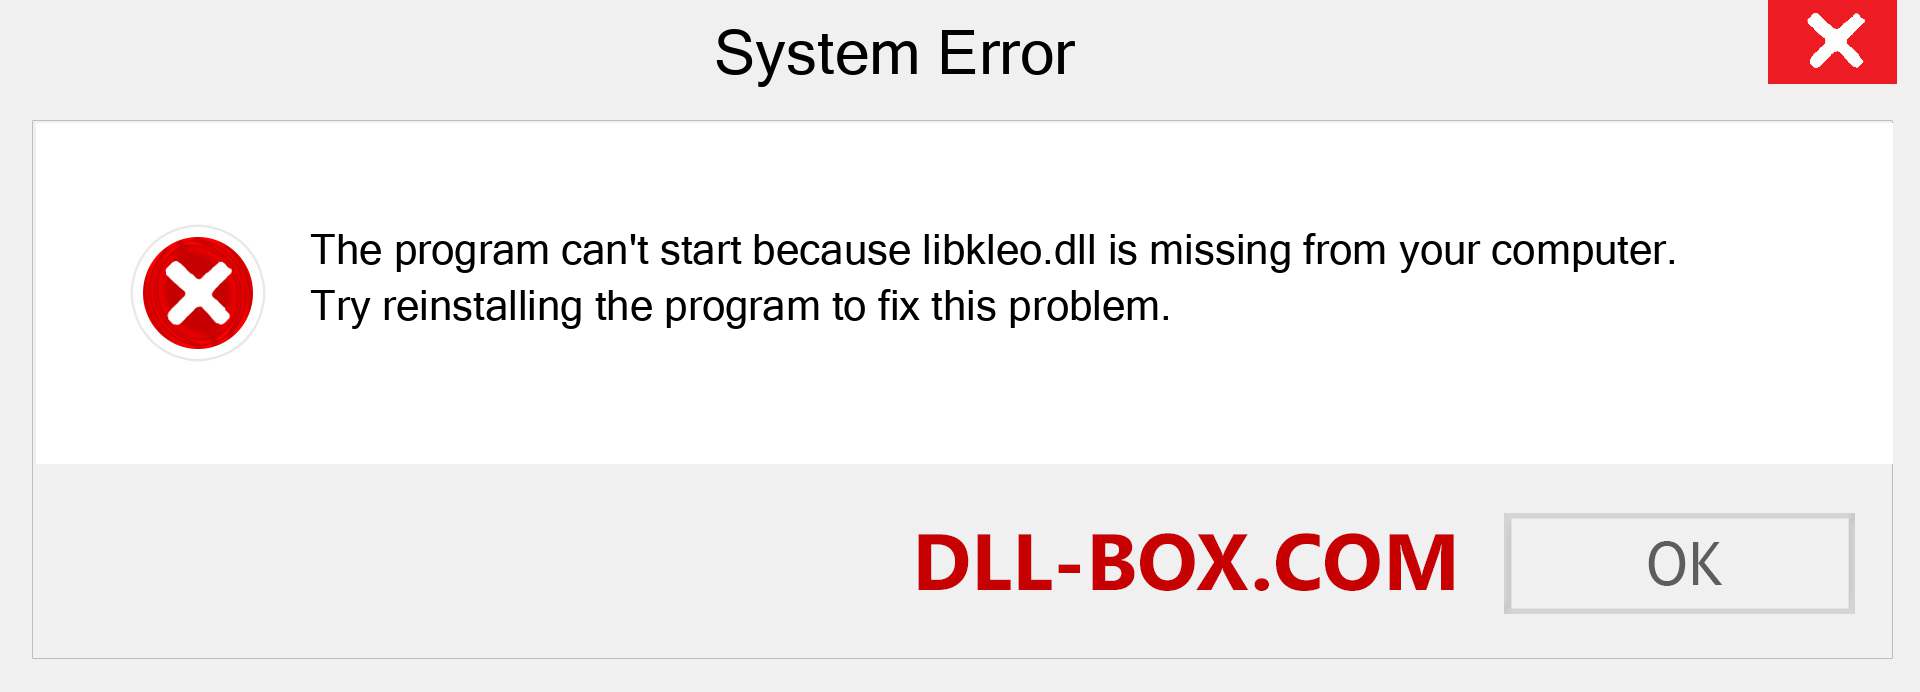  libkleo.dll file is missing?. Download for Windows 7, 8, 10 - Fix  libkleo dll Missing Error on Windows, photos, images